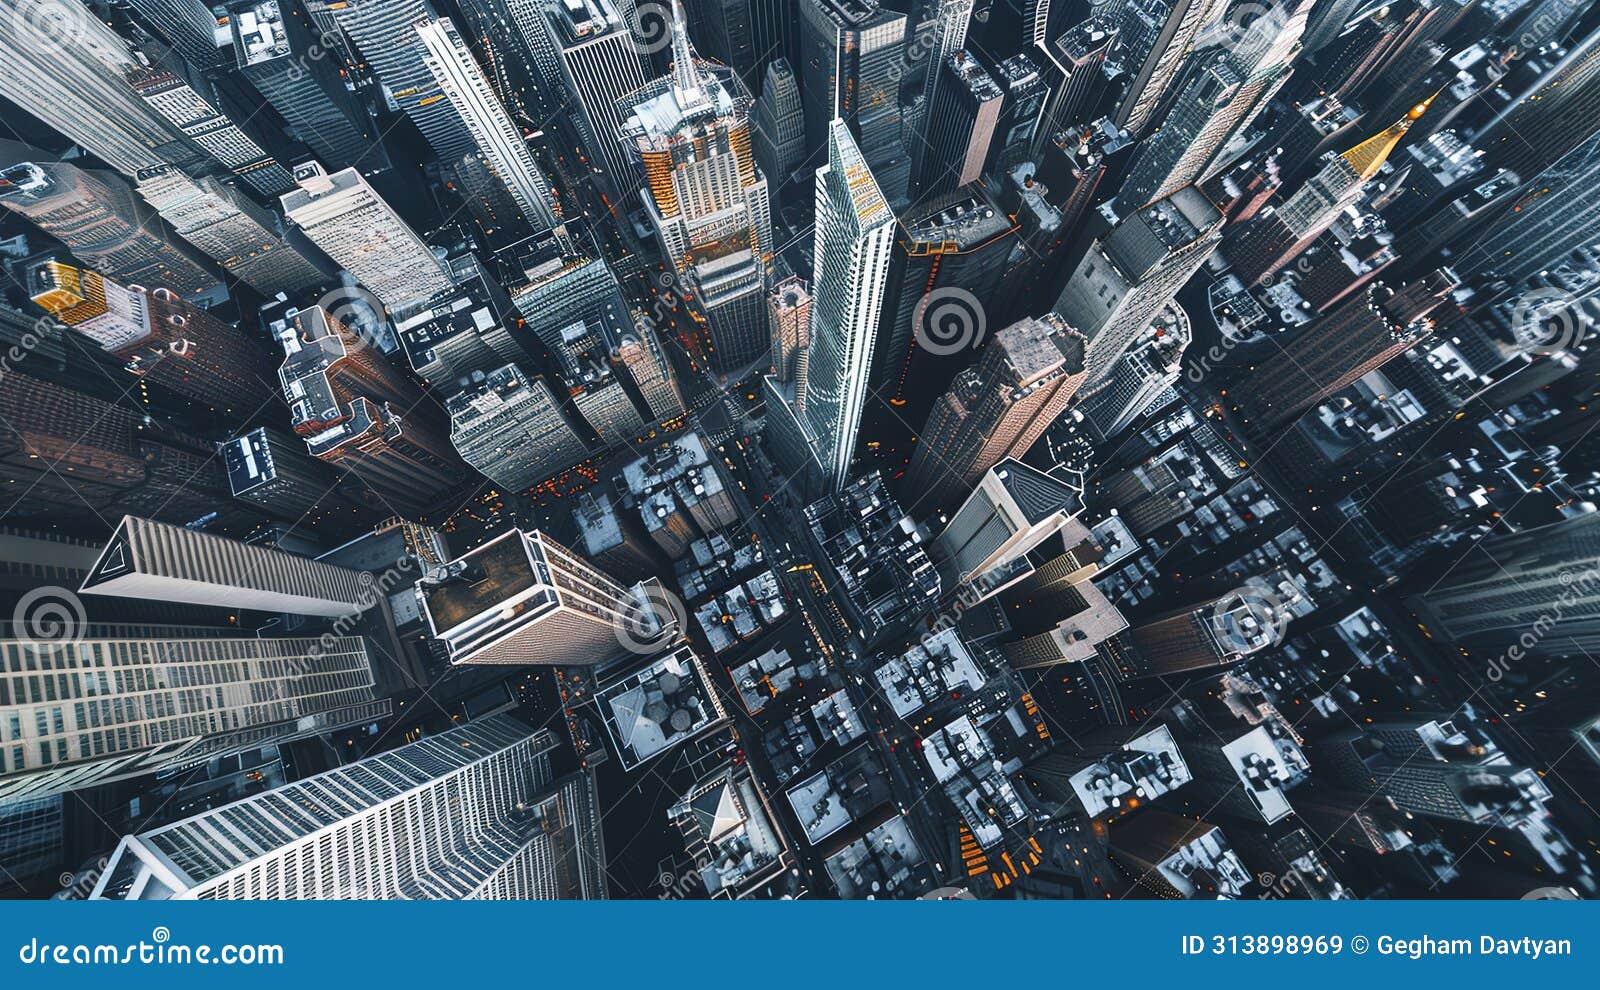 panoramic view of the city, aerial view of the city, buildings scene, biuldings in the city, view of buildings in the city